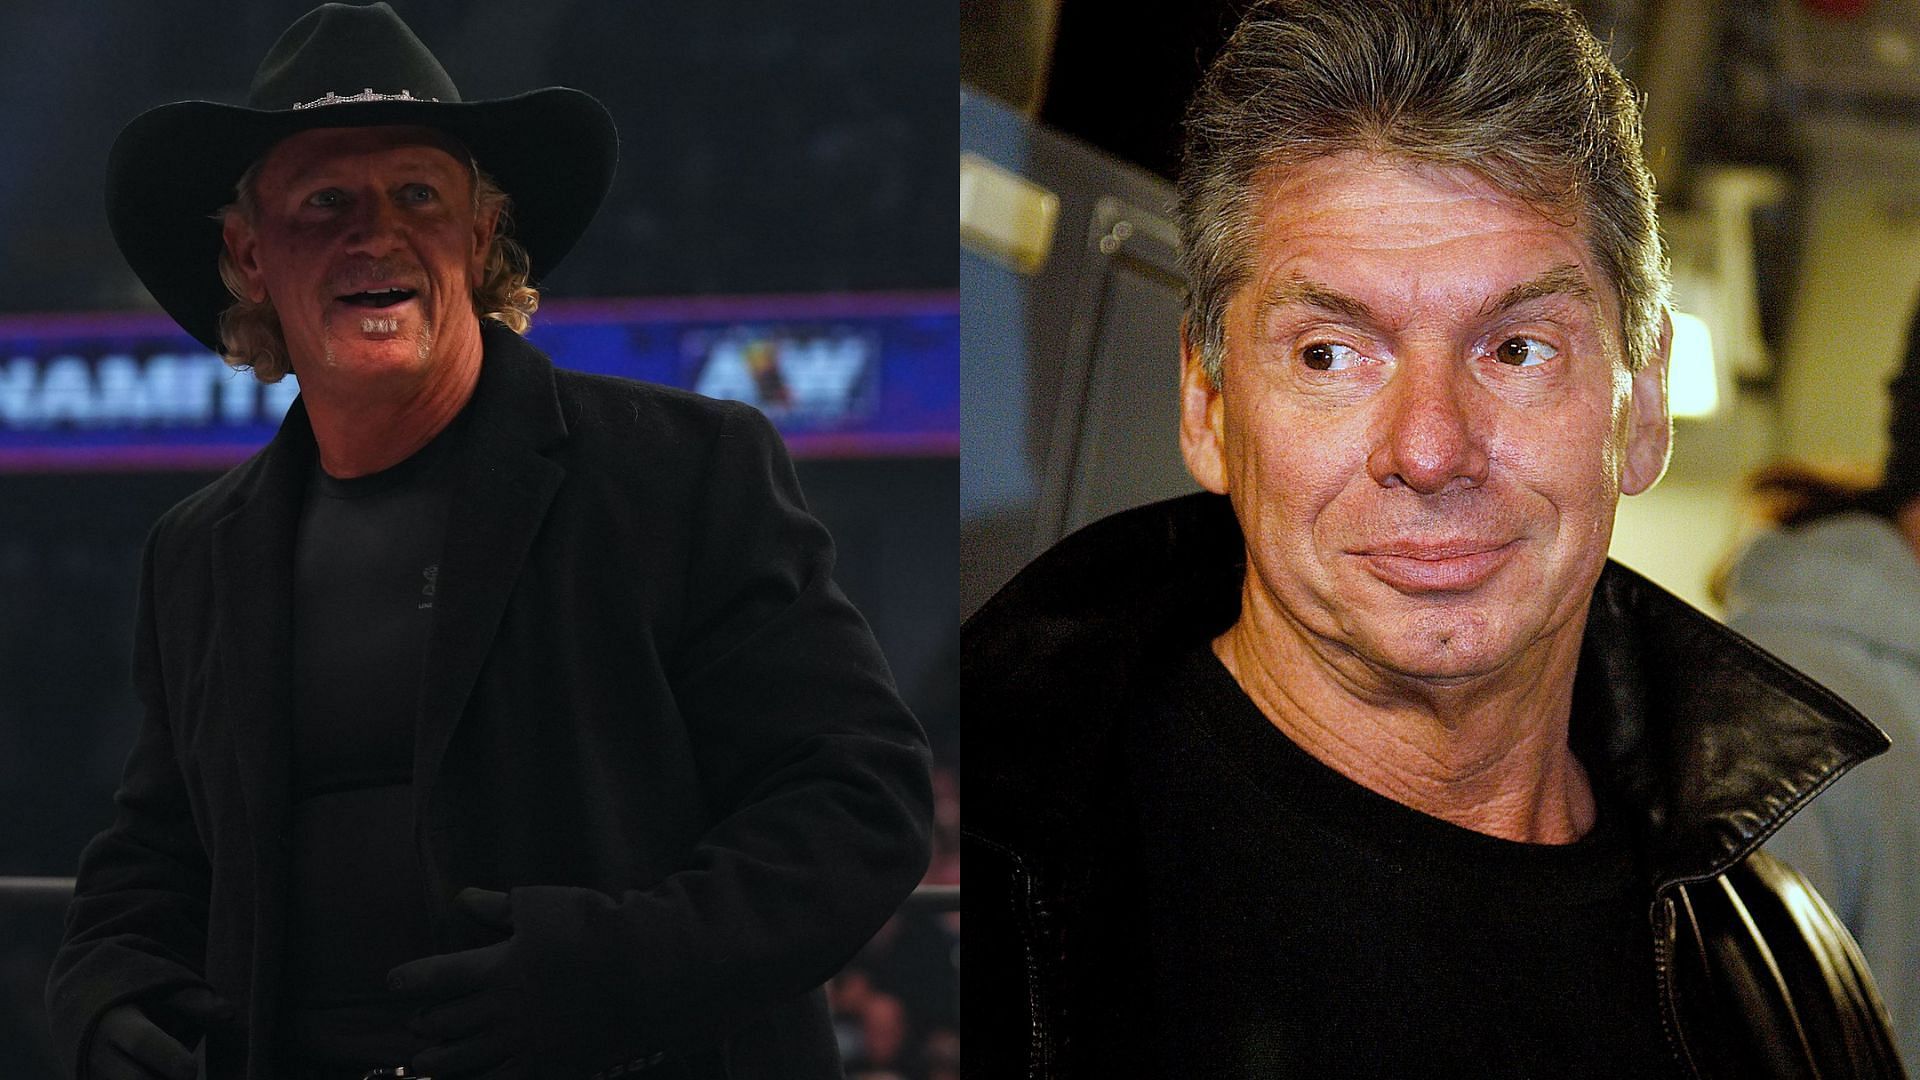 Could Vince McMahon bring his controversial star back to WWE?